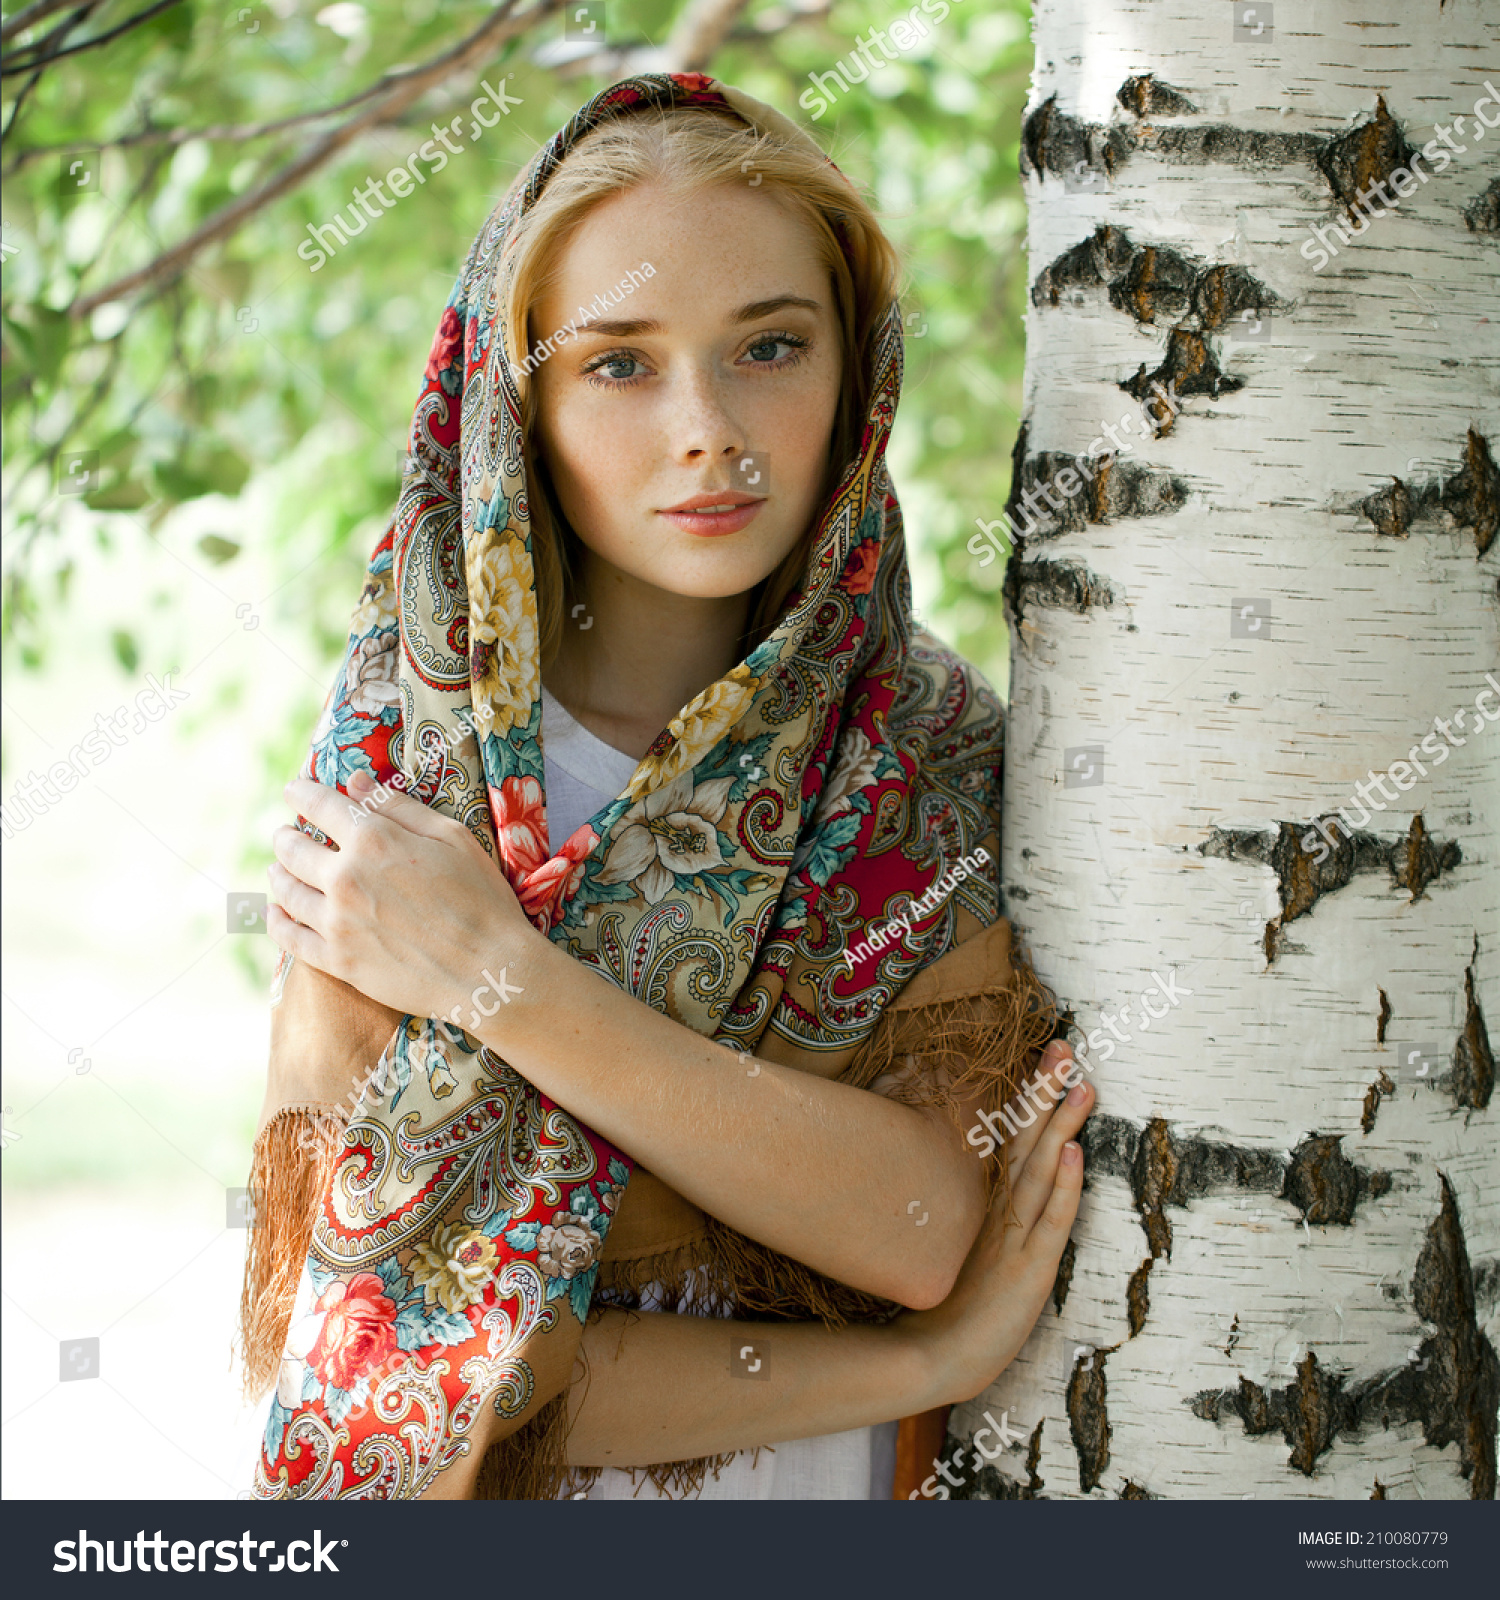 https://image.shutterstock.com/z/stock-photo-russian-beauty-woman-in-the-national-patterned-scarf-210080779.jpg